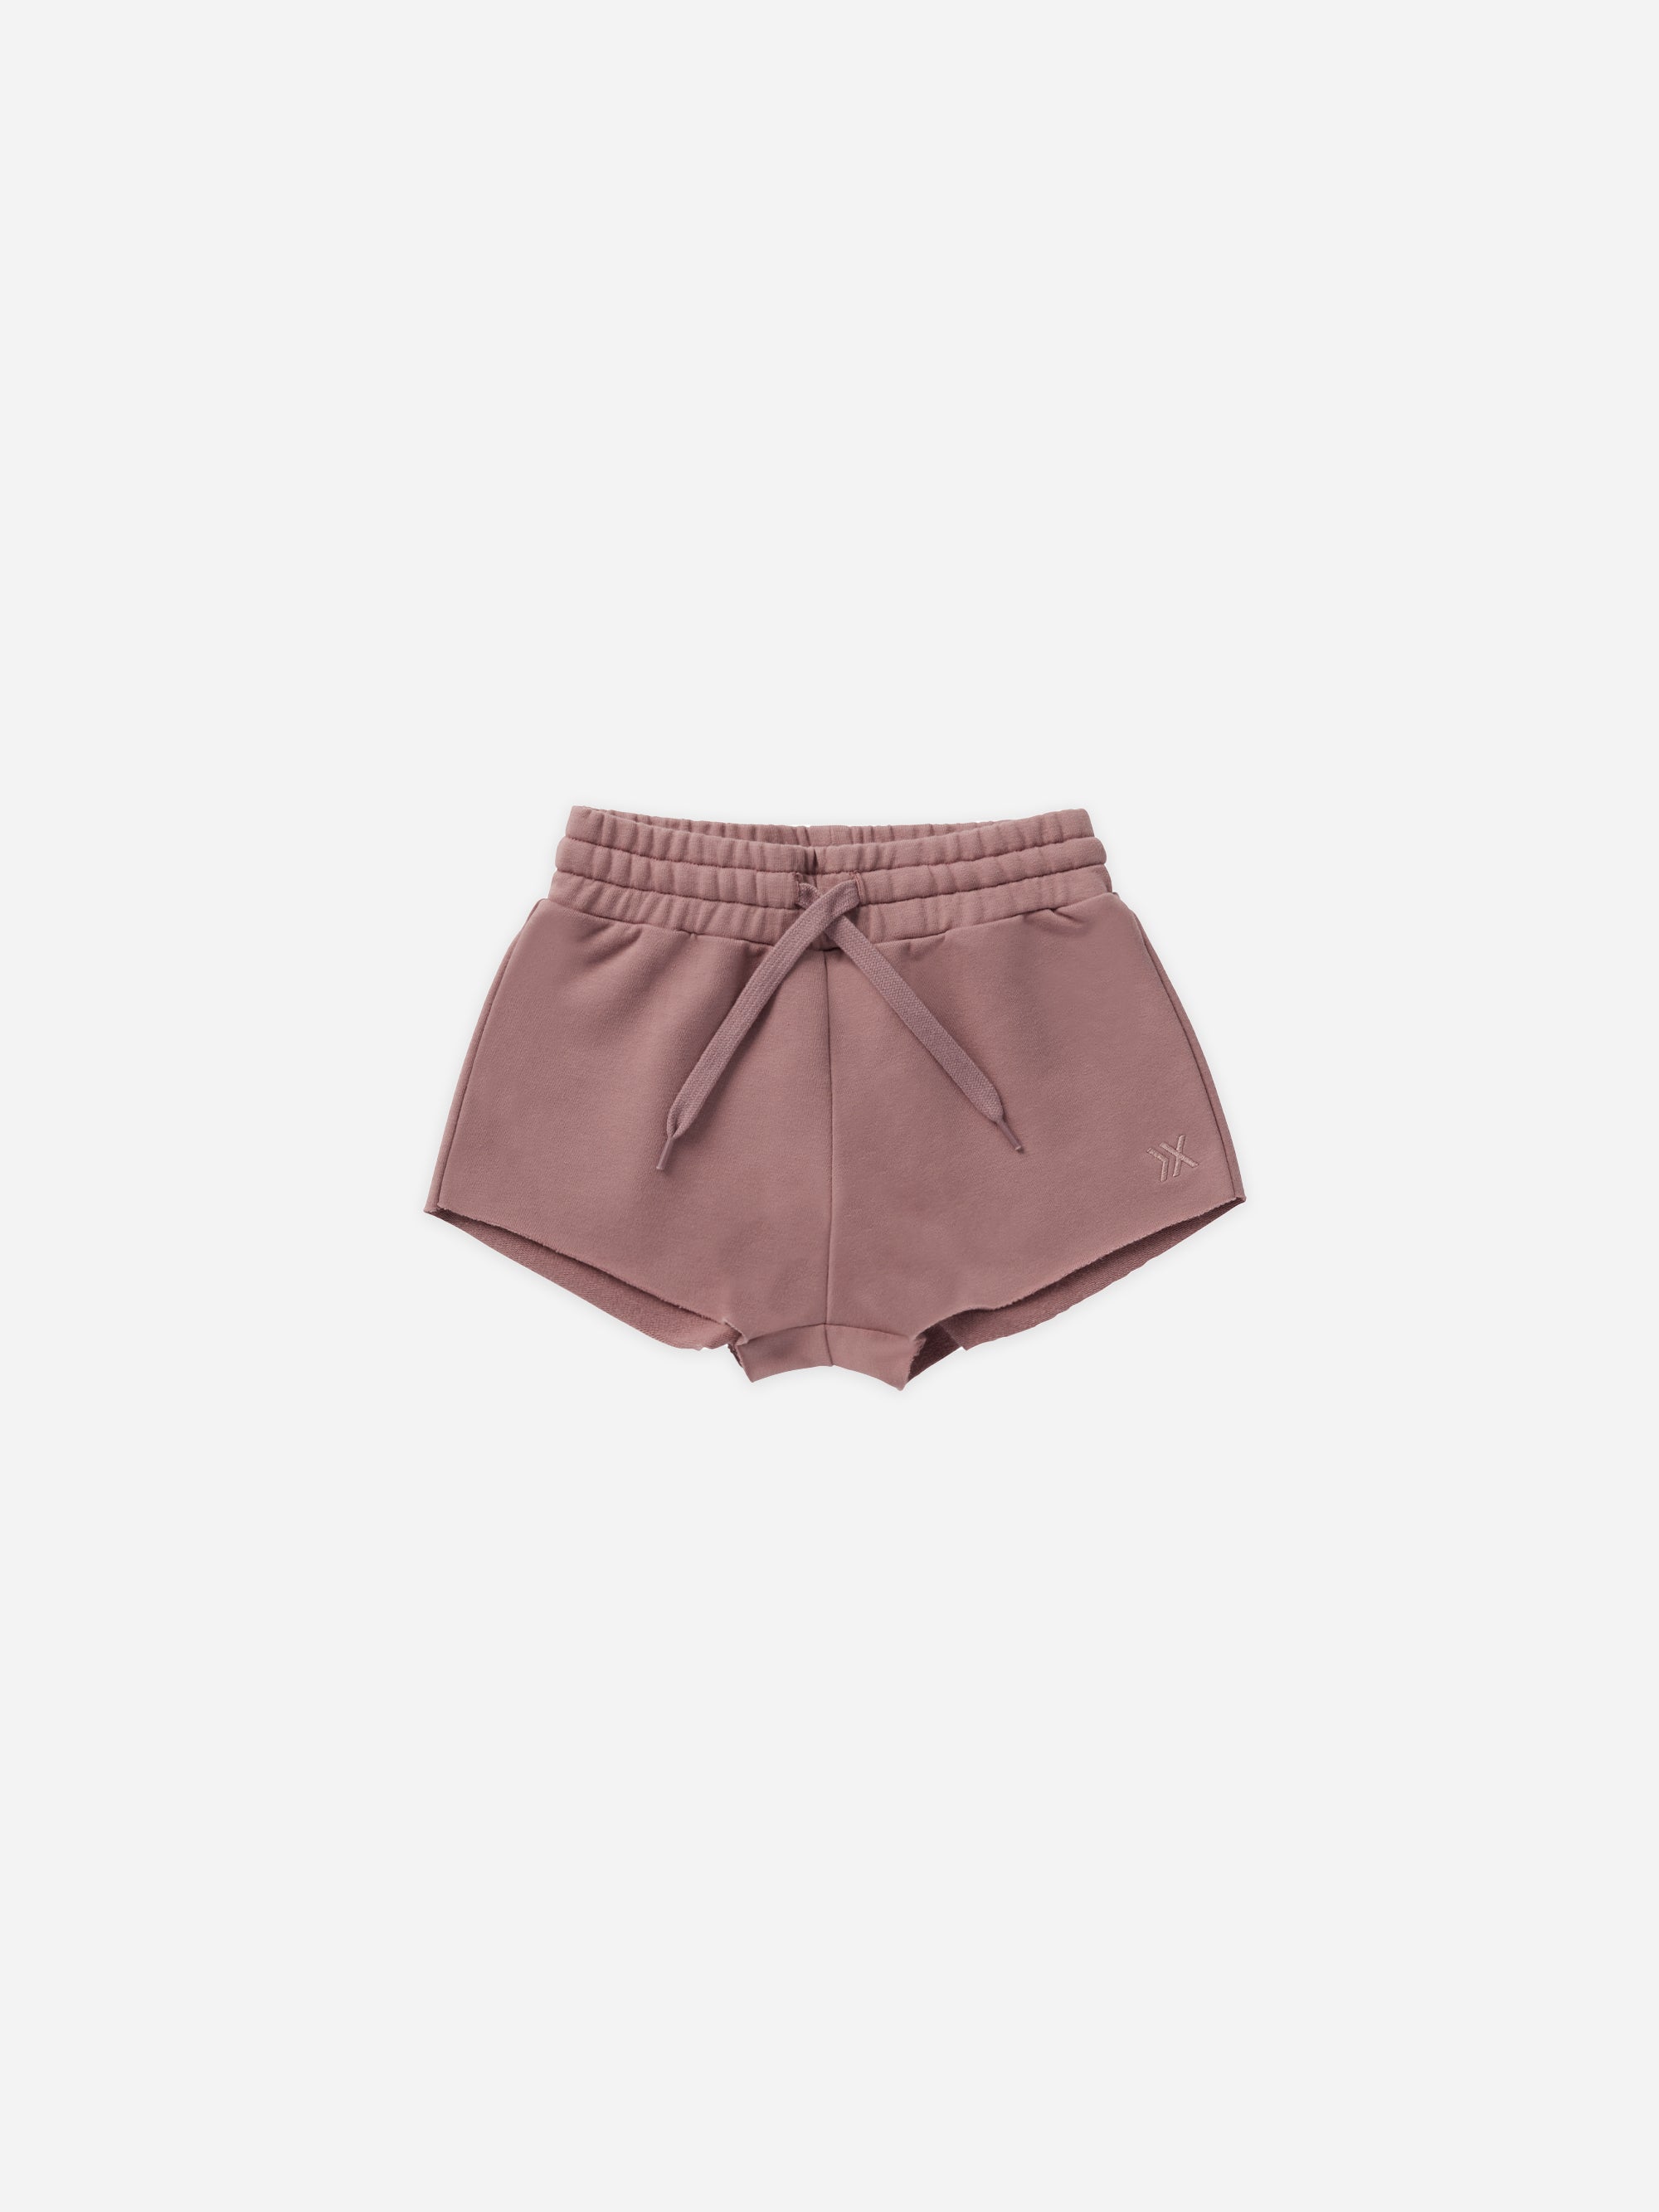 Sweat Short || Mulberry - Rylee + Cru | Kids Clothes | Trendy Baby Clothes | Modern Infant Outfits |